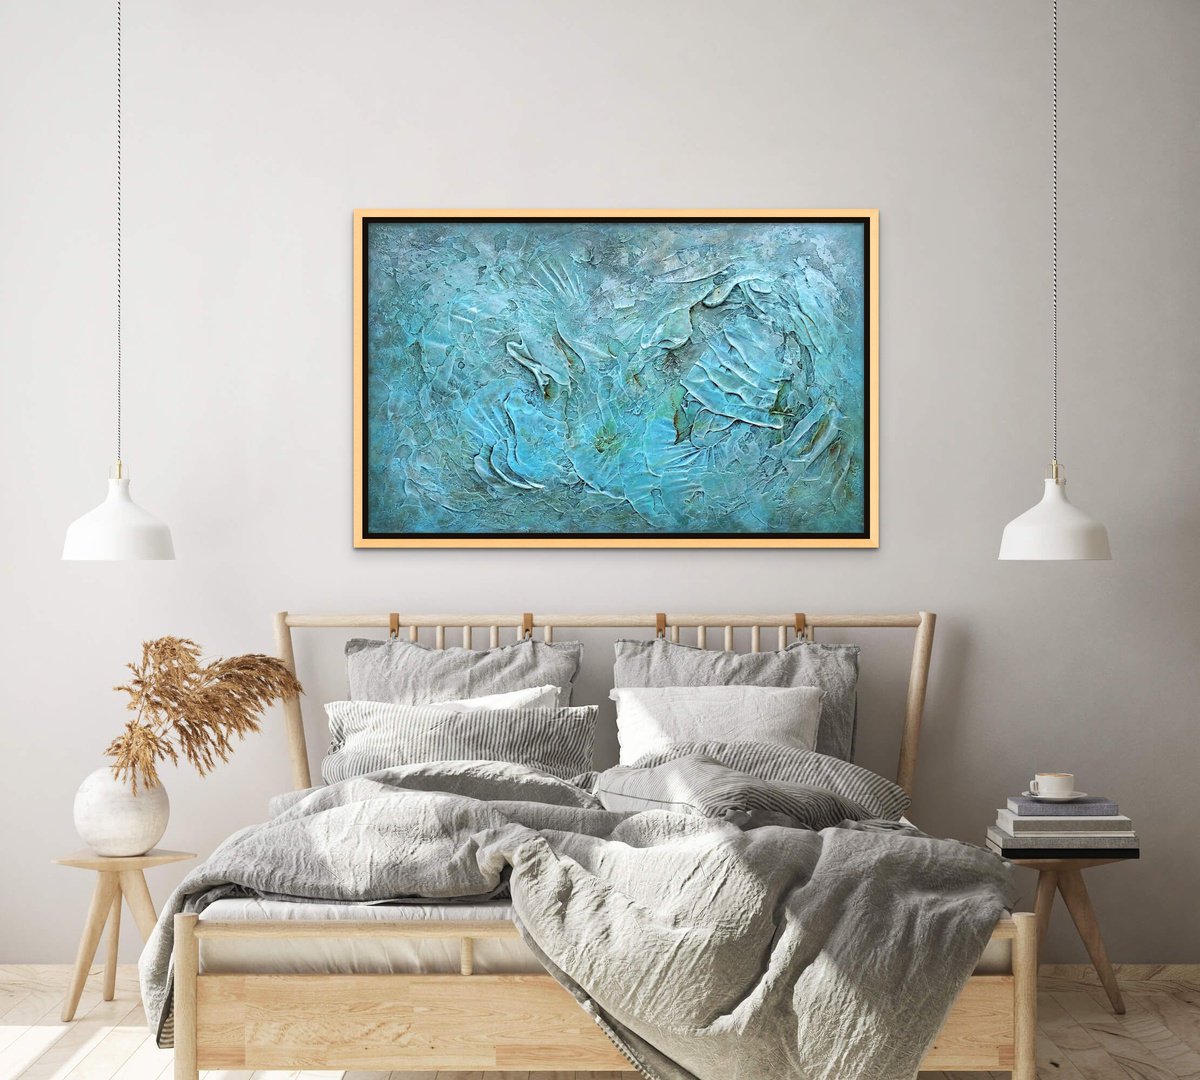 FOSSILS AND SEA SHELLS. Large Abstract Blue Teal Silver Gray Textured Painting 3D by Sveta Osborne